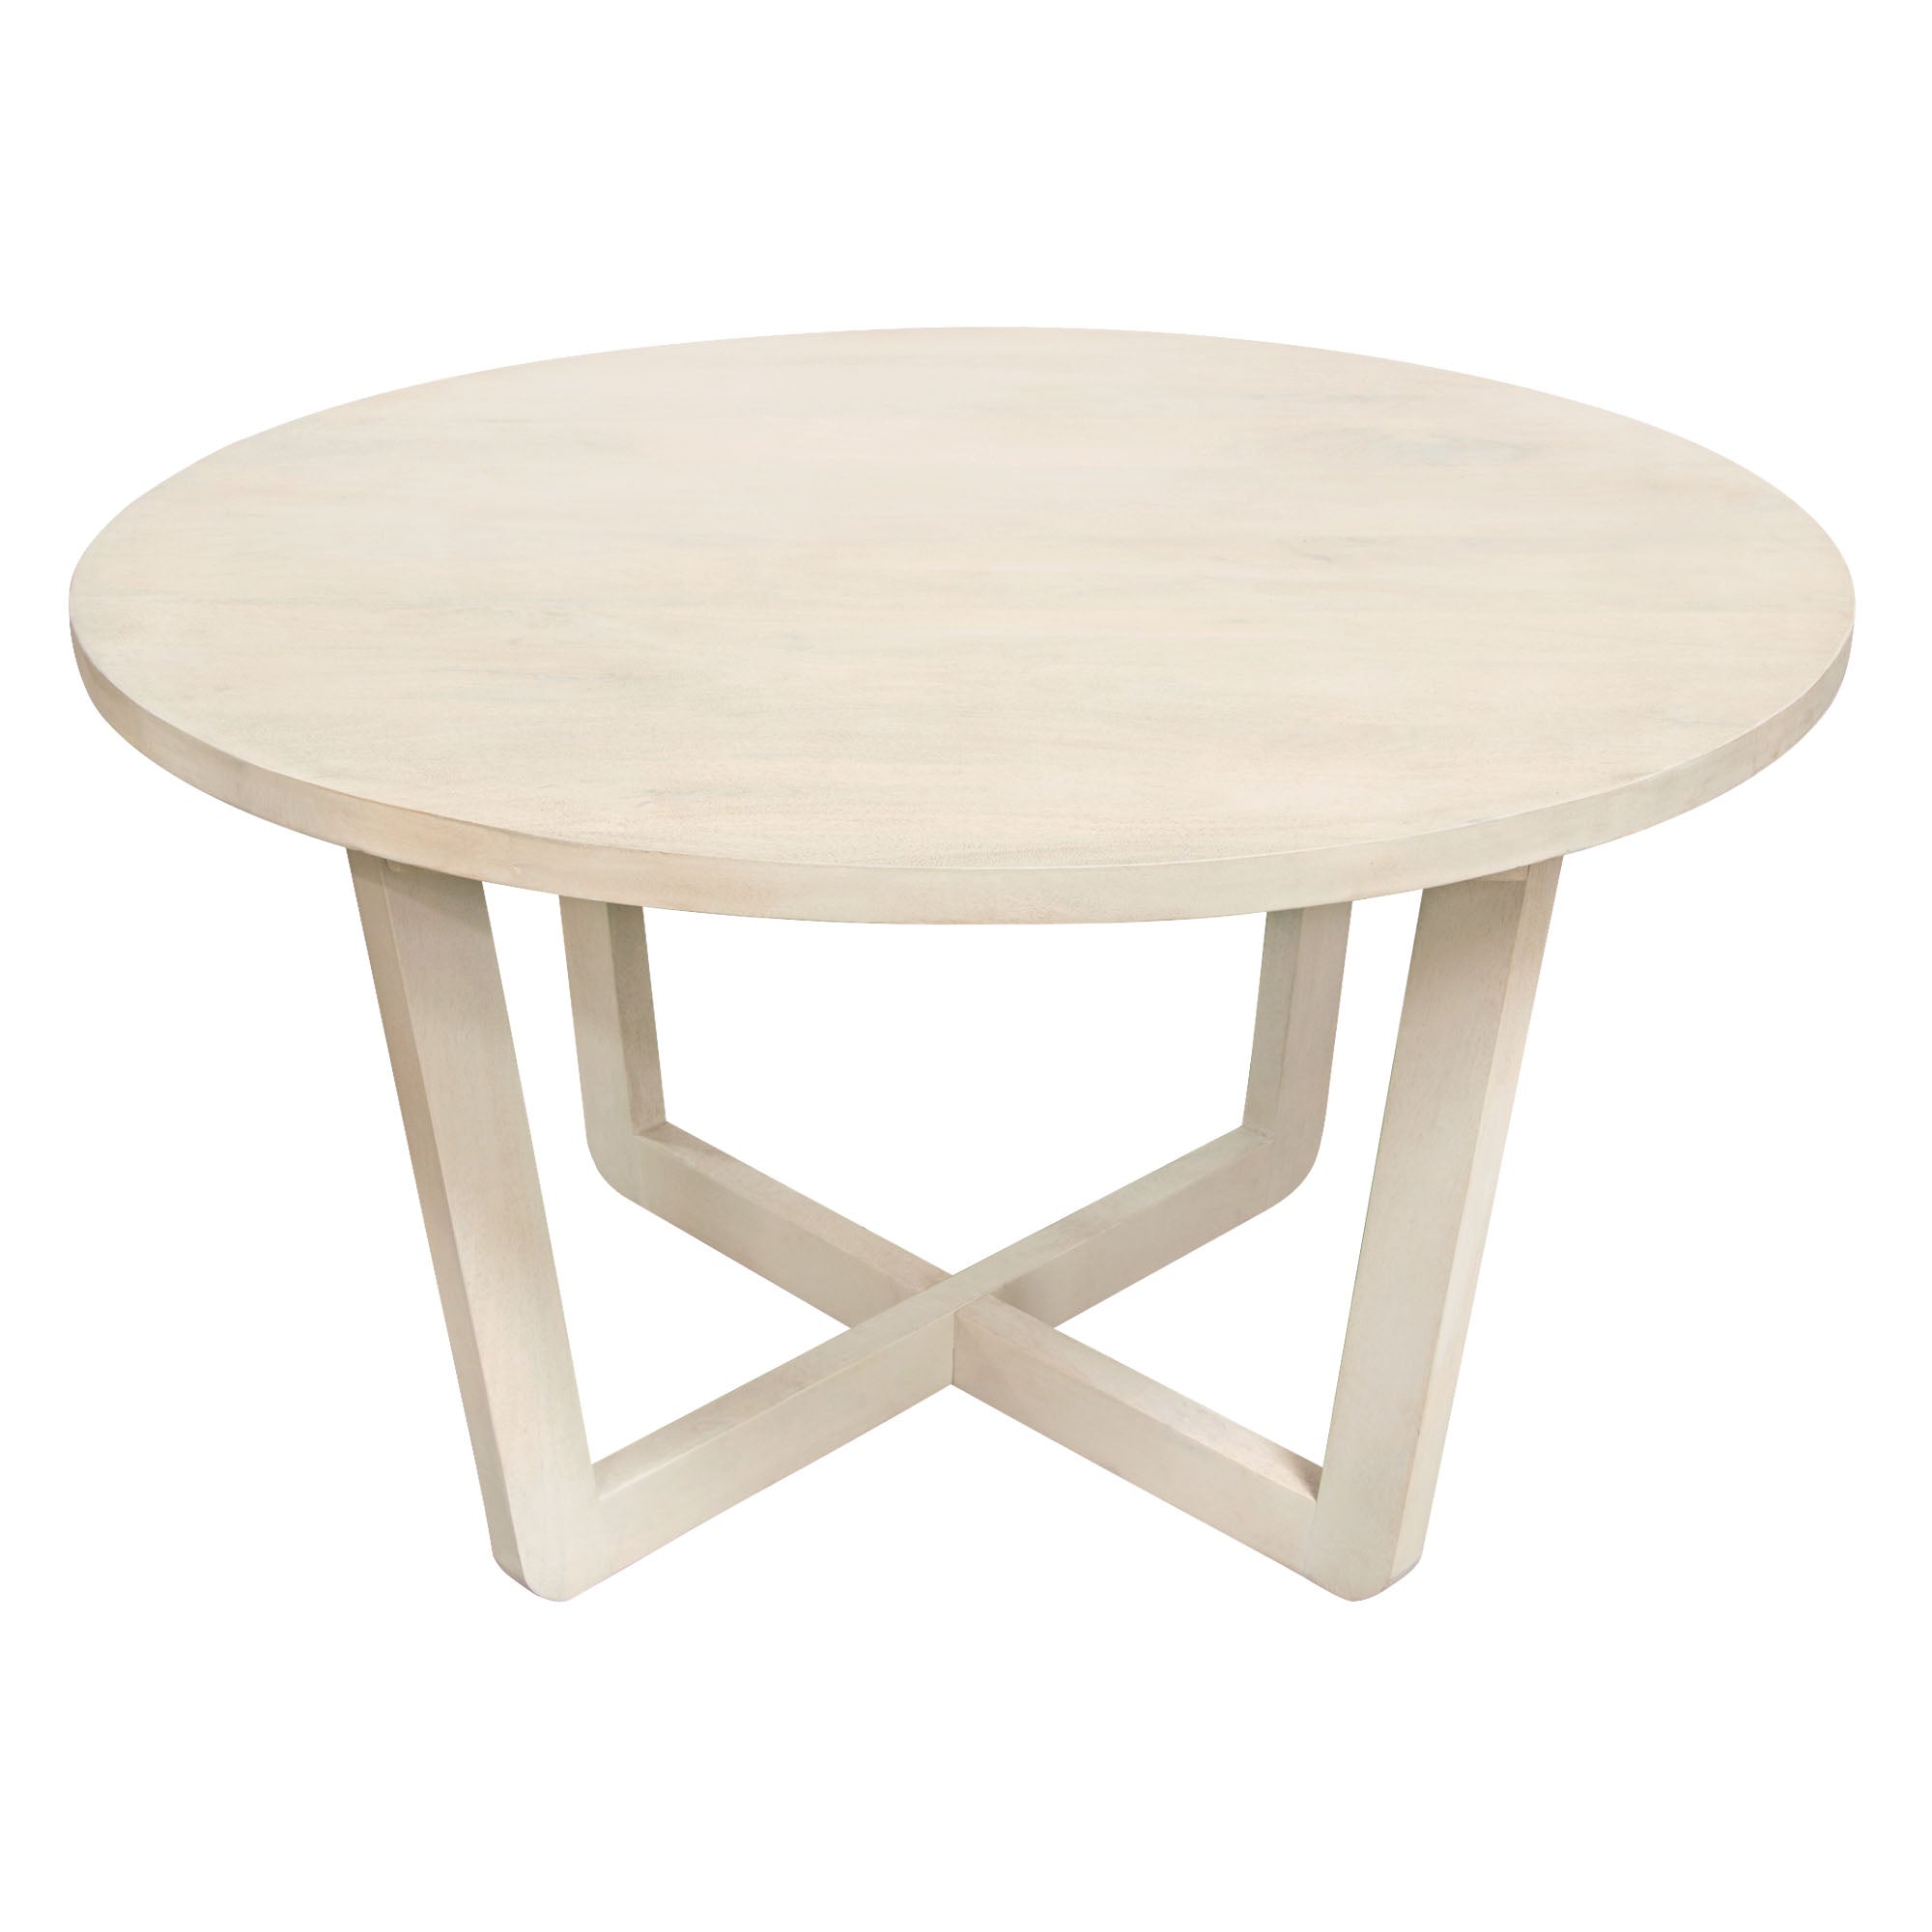 SOLANO DINING TABLE